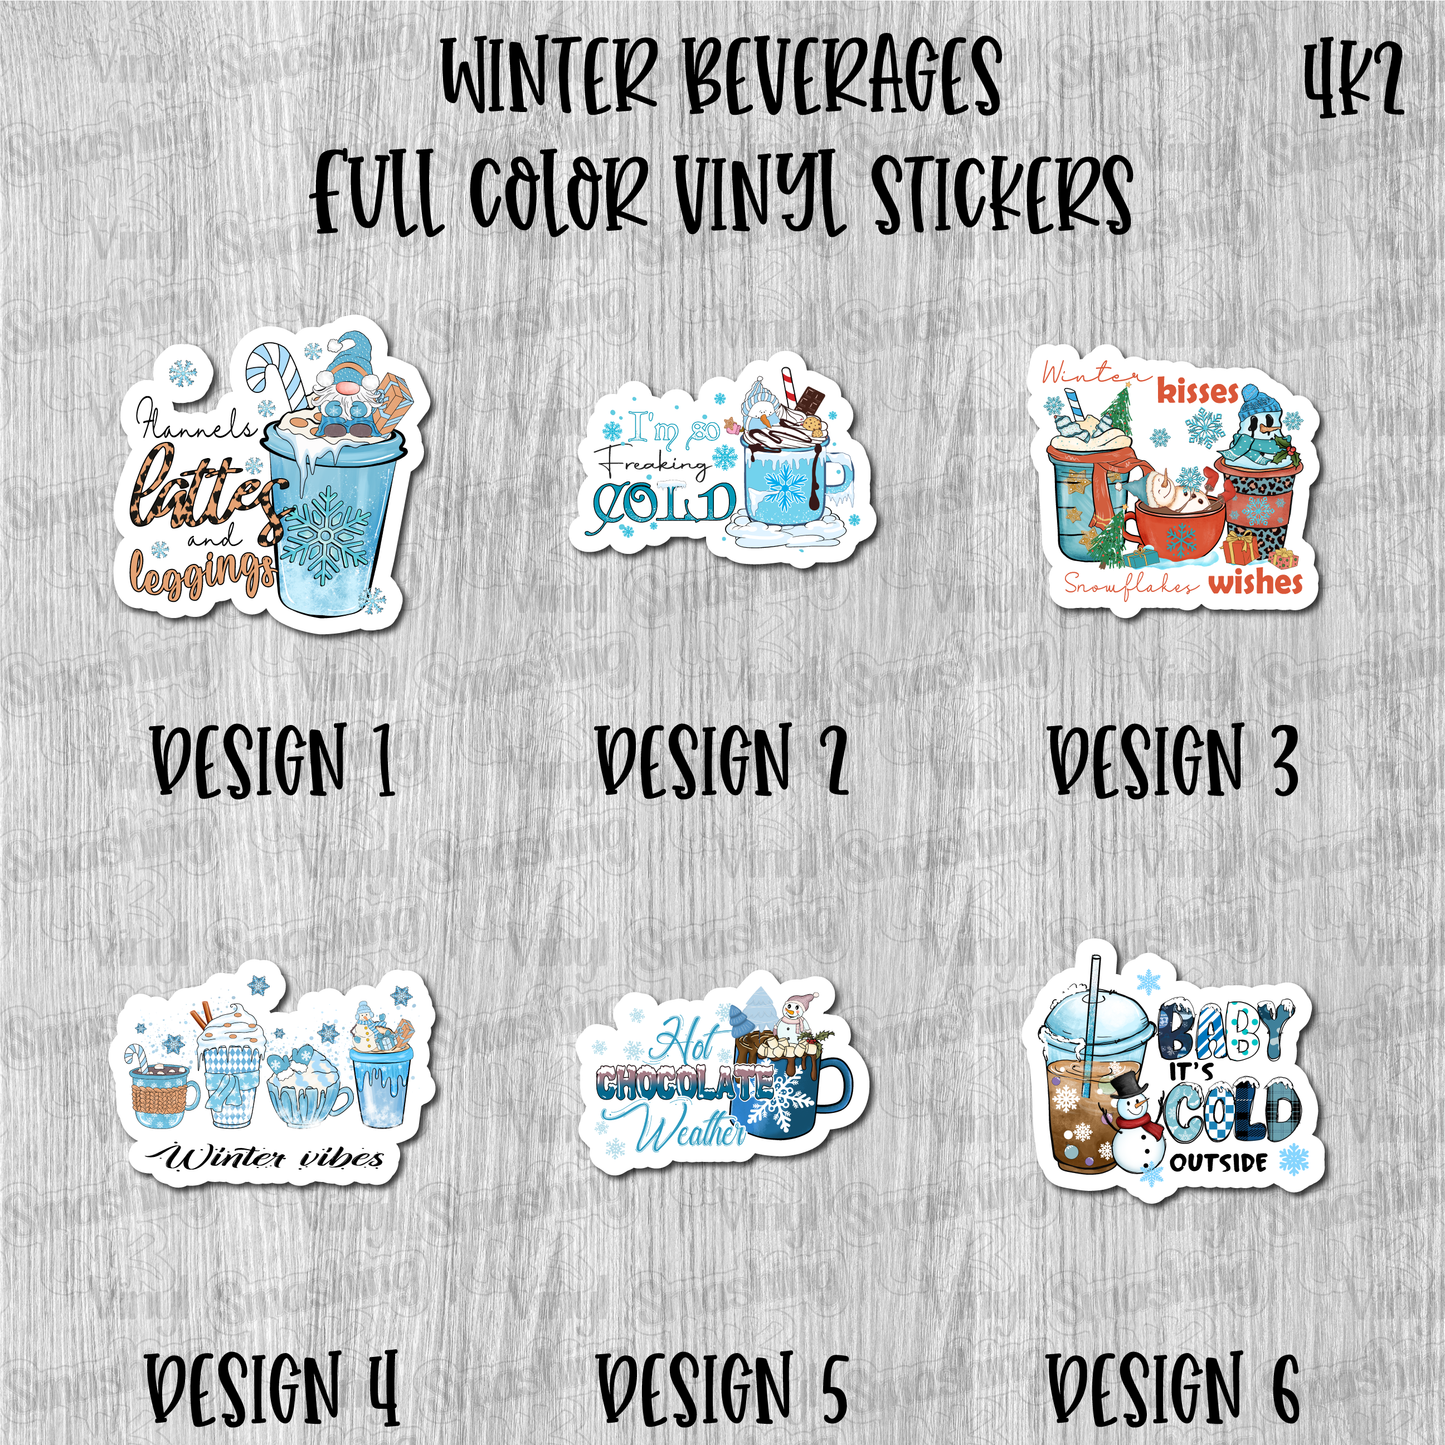 Winter Beverages - Full Color Vinyl Stickers (SHIPS IN 3-7 BUS DAYS)